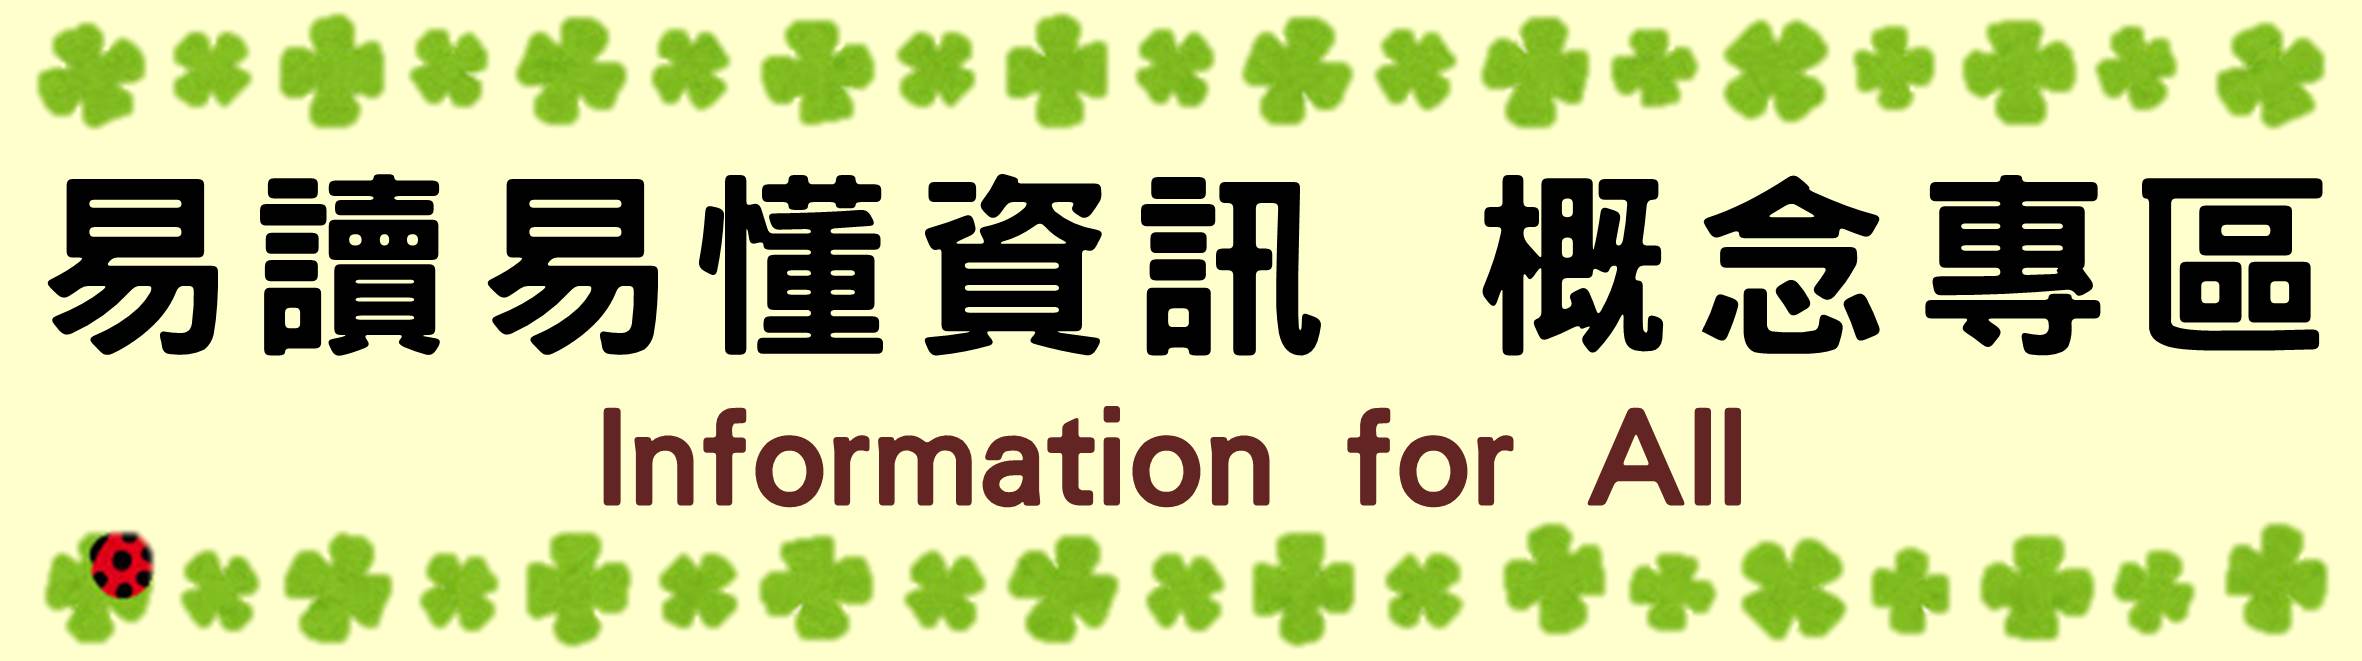 Information for all概念說明